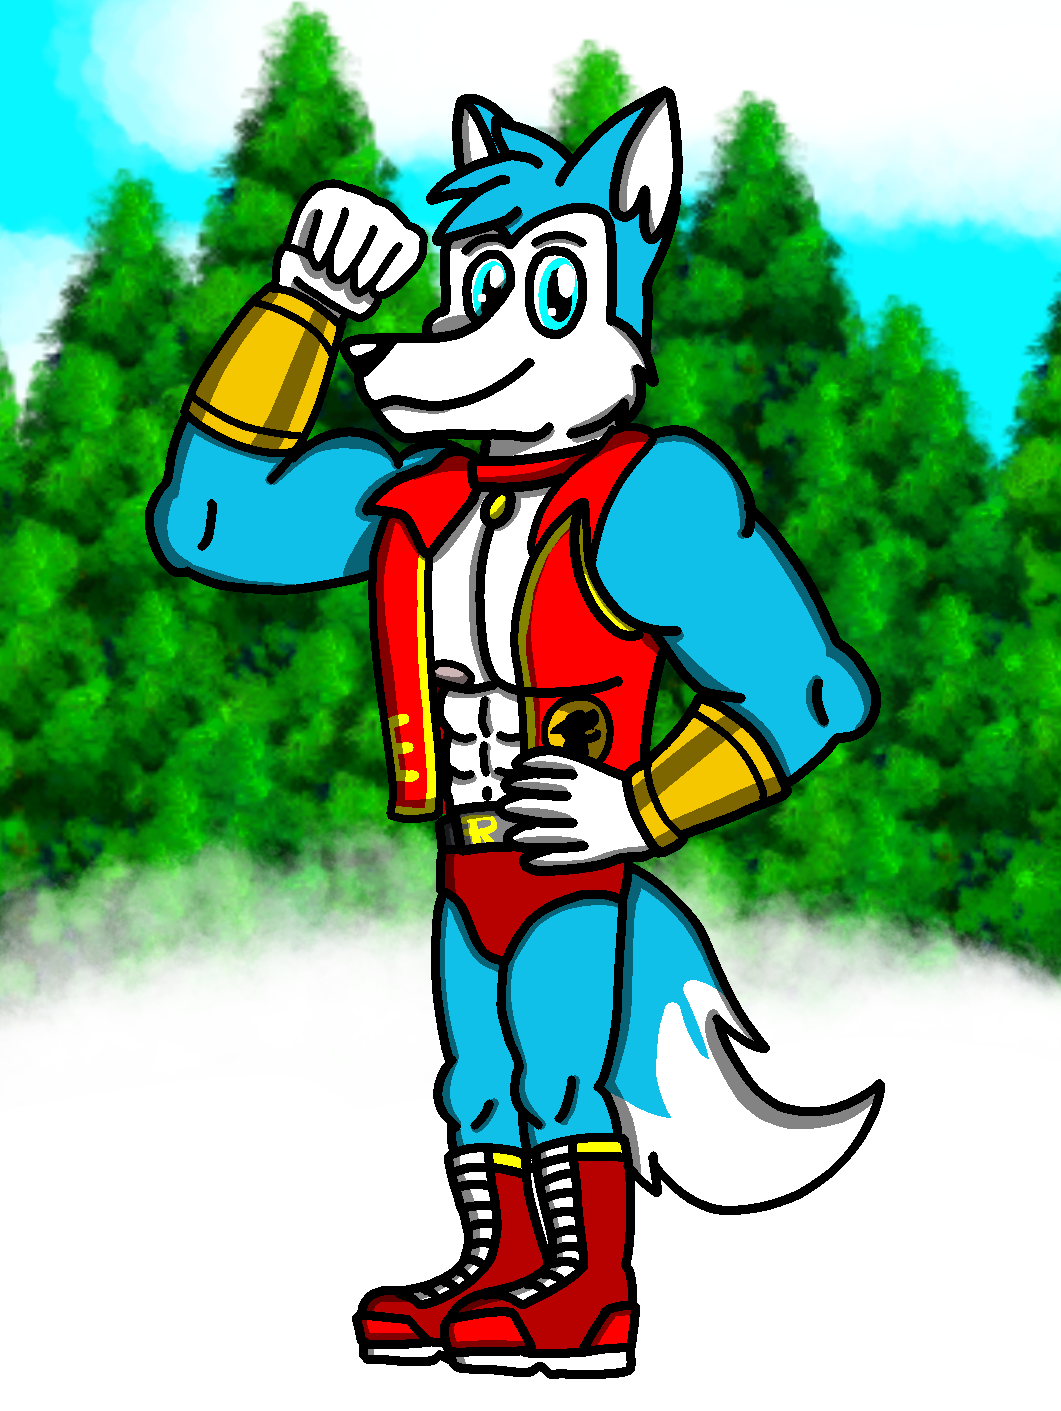 Exile Road Rovers In His New Hero Outfit By Jfoxyrover16 On Deviantart